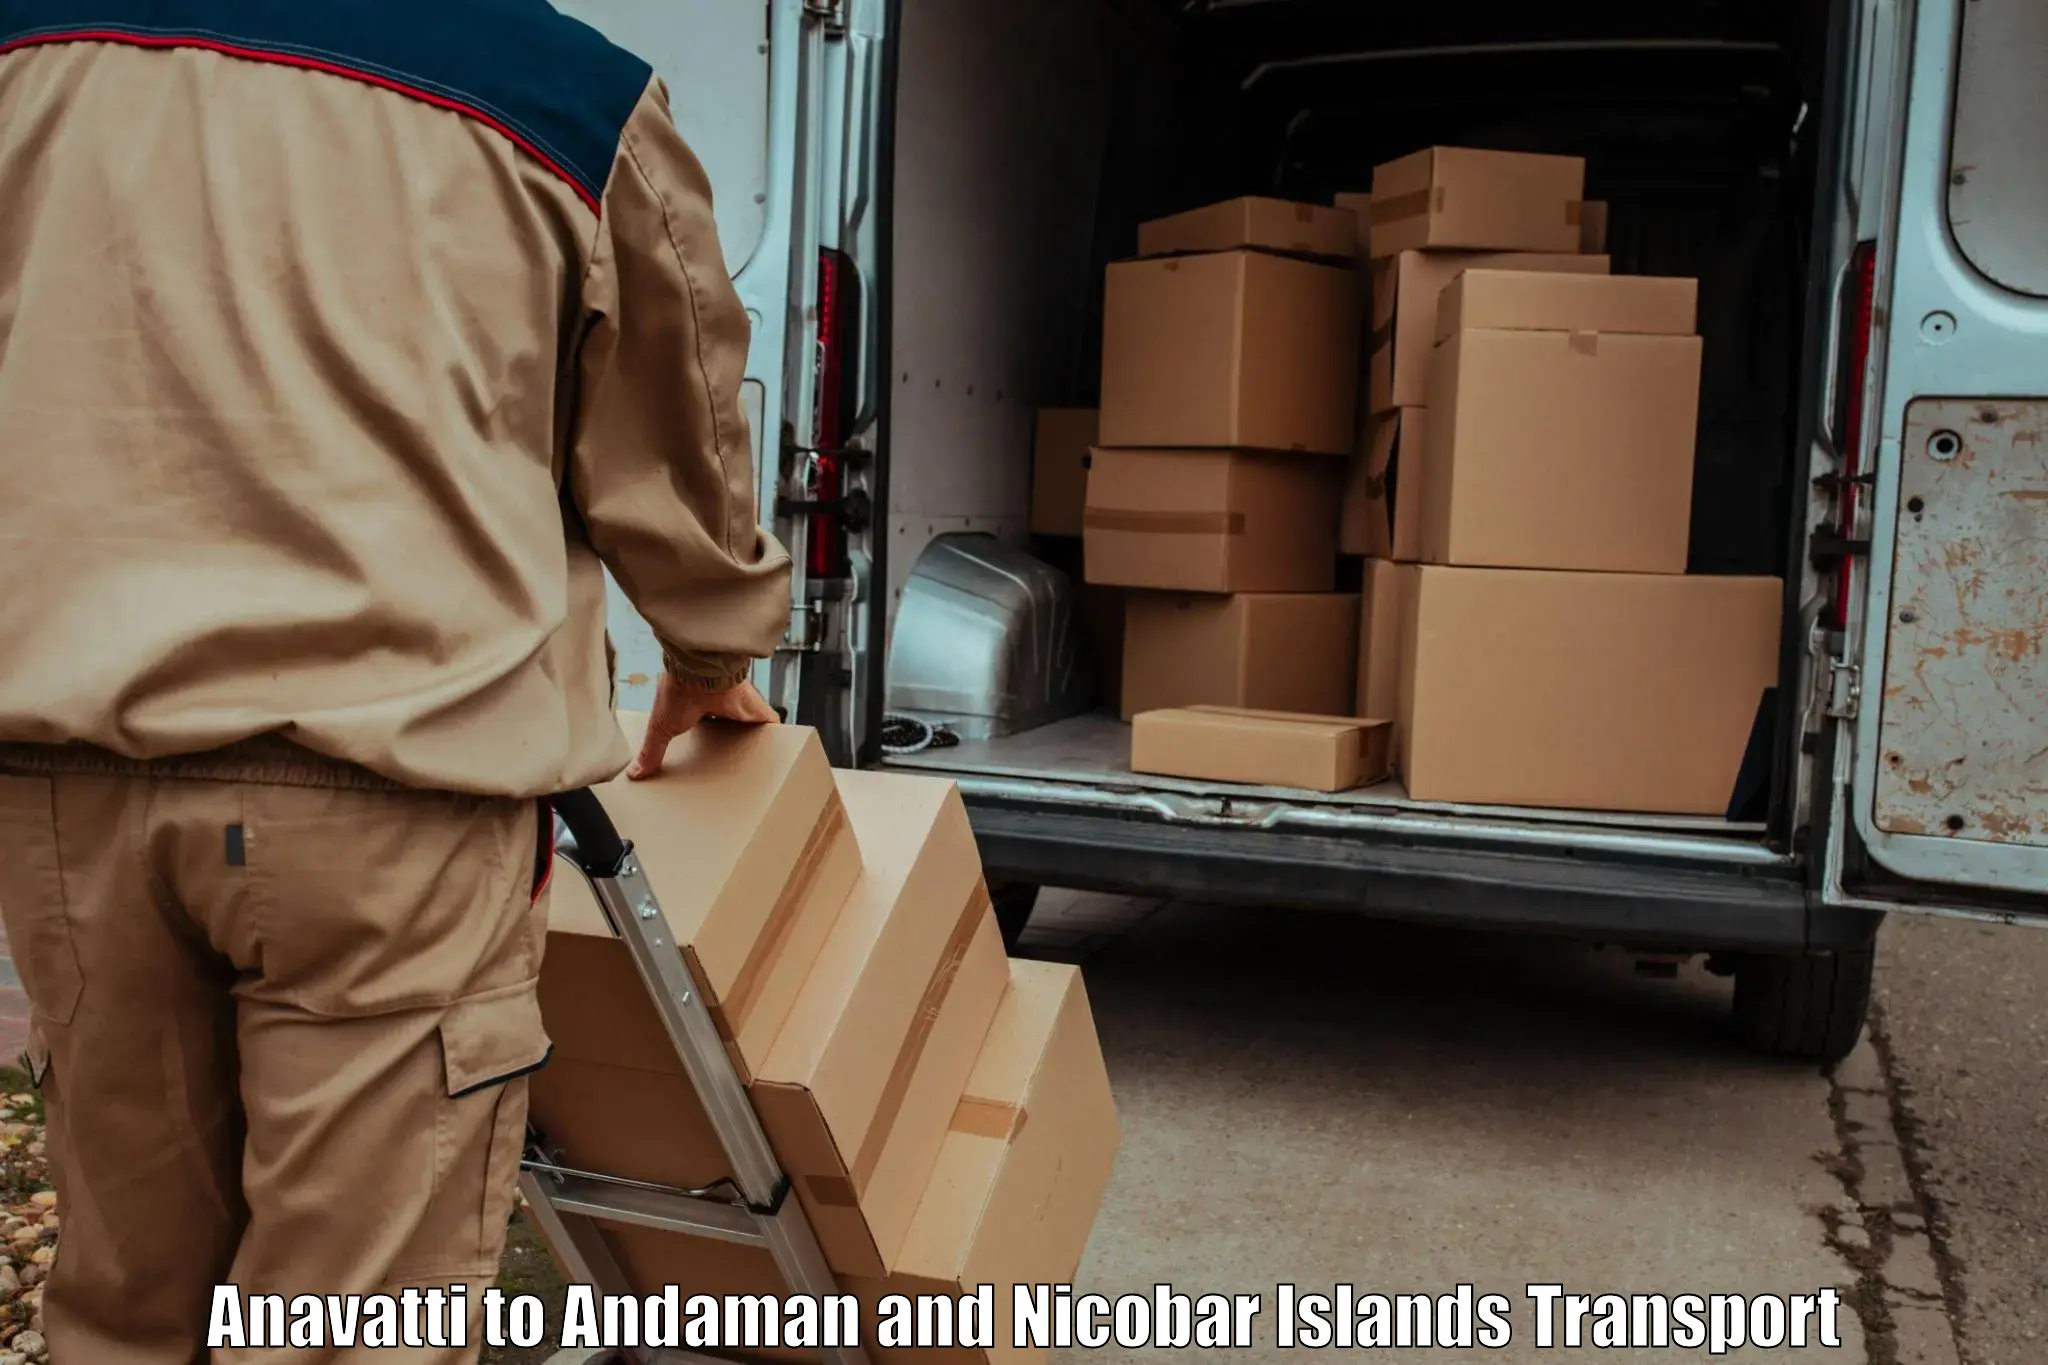 Delivery service Anavatti to Andaman and Nicobar Islands